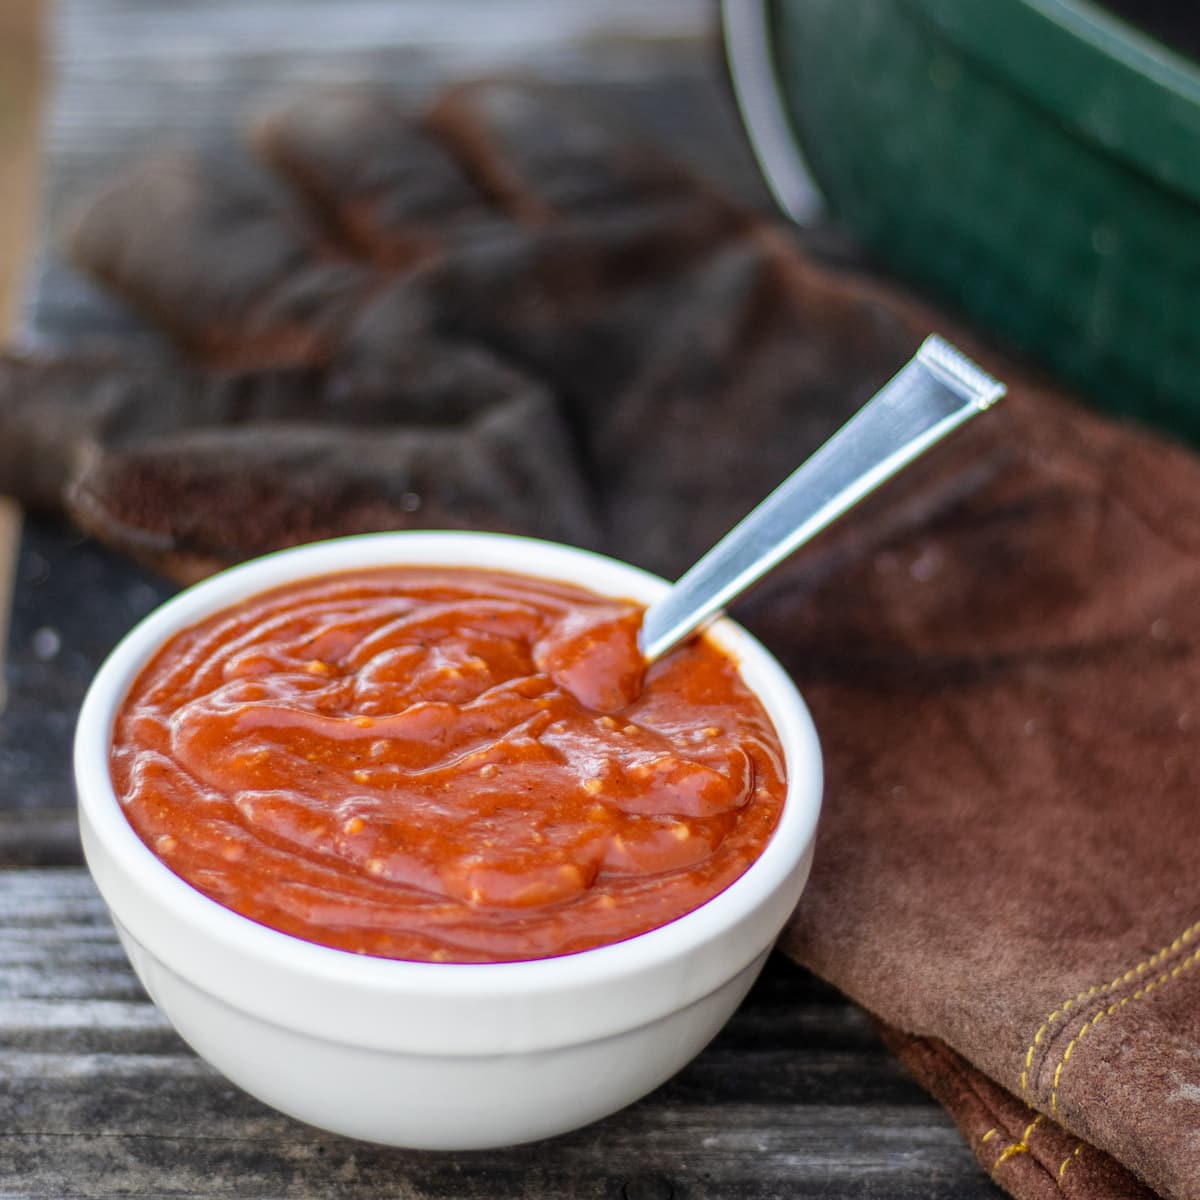 a bowl of BBQ sauce outside on a wooden table by some leather grilling gloves